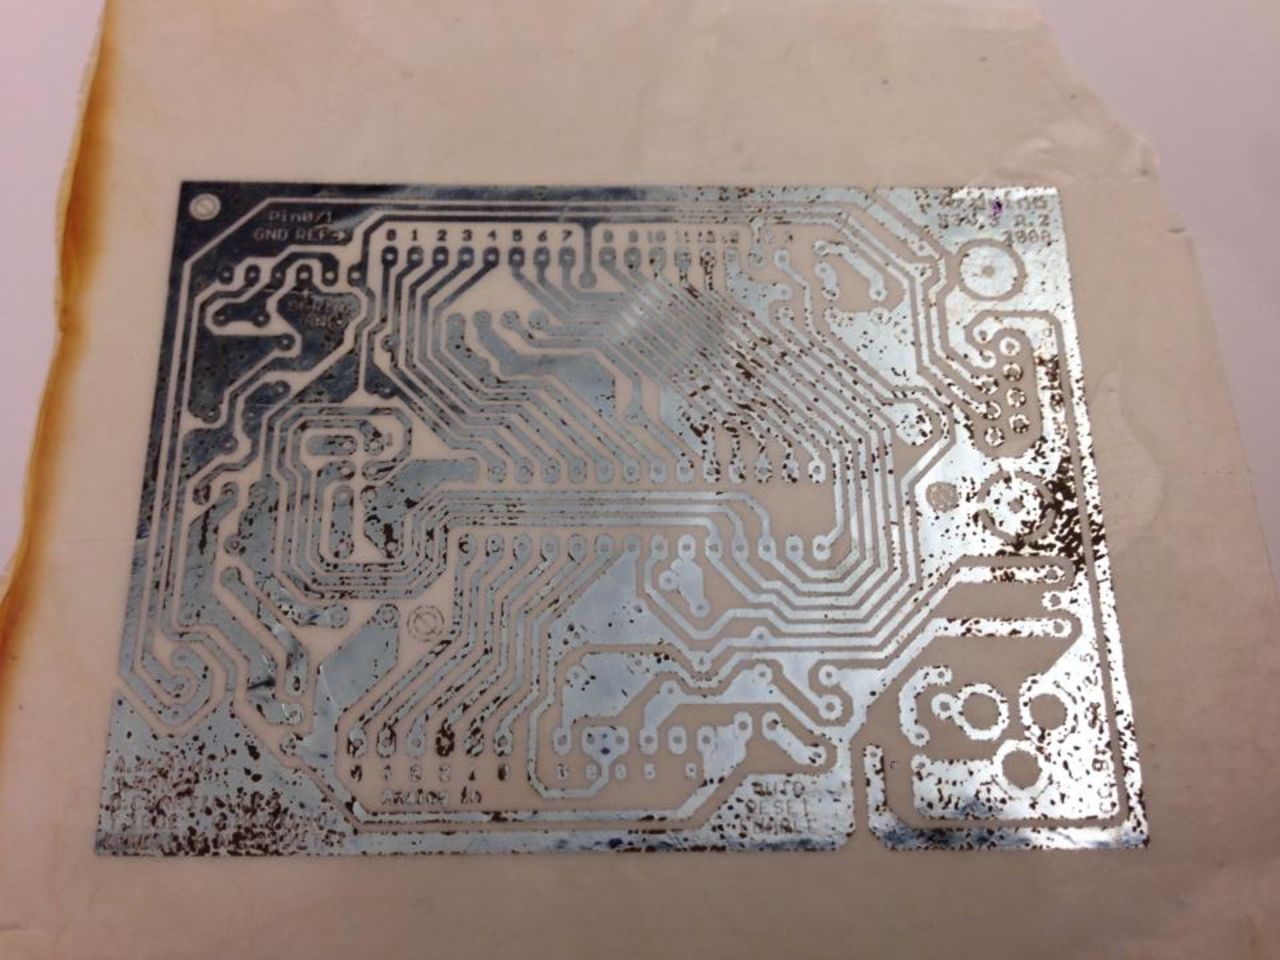 The circuits are printed from silver nanoparticle ink in an effort to make the machine as biodegradable as possible.